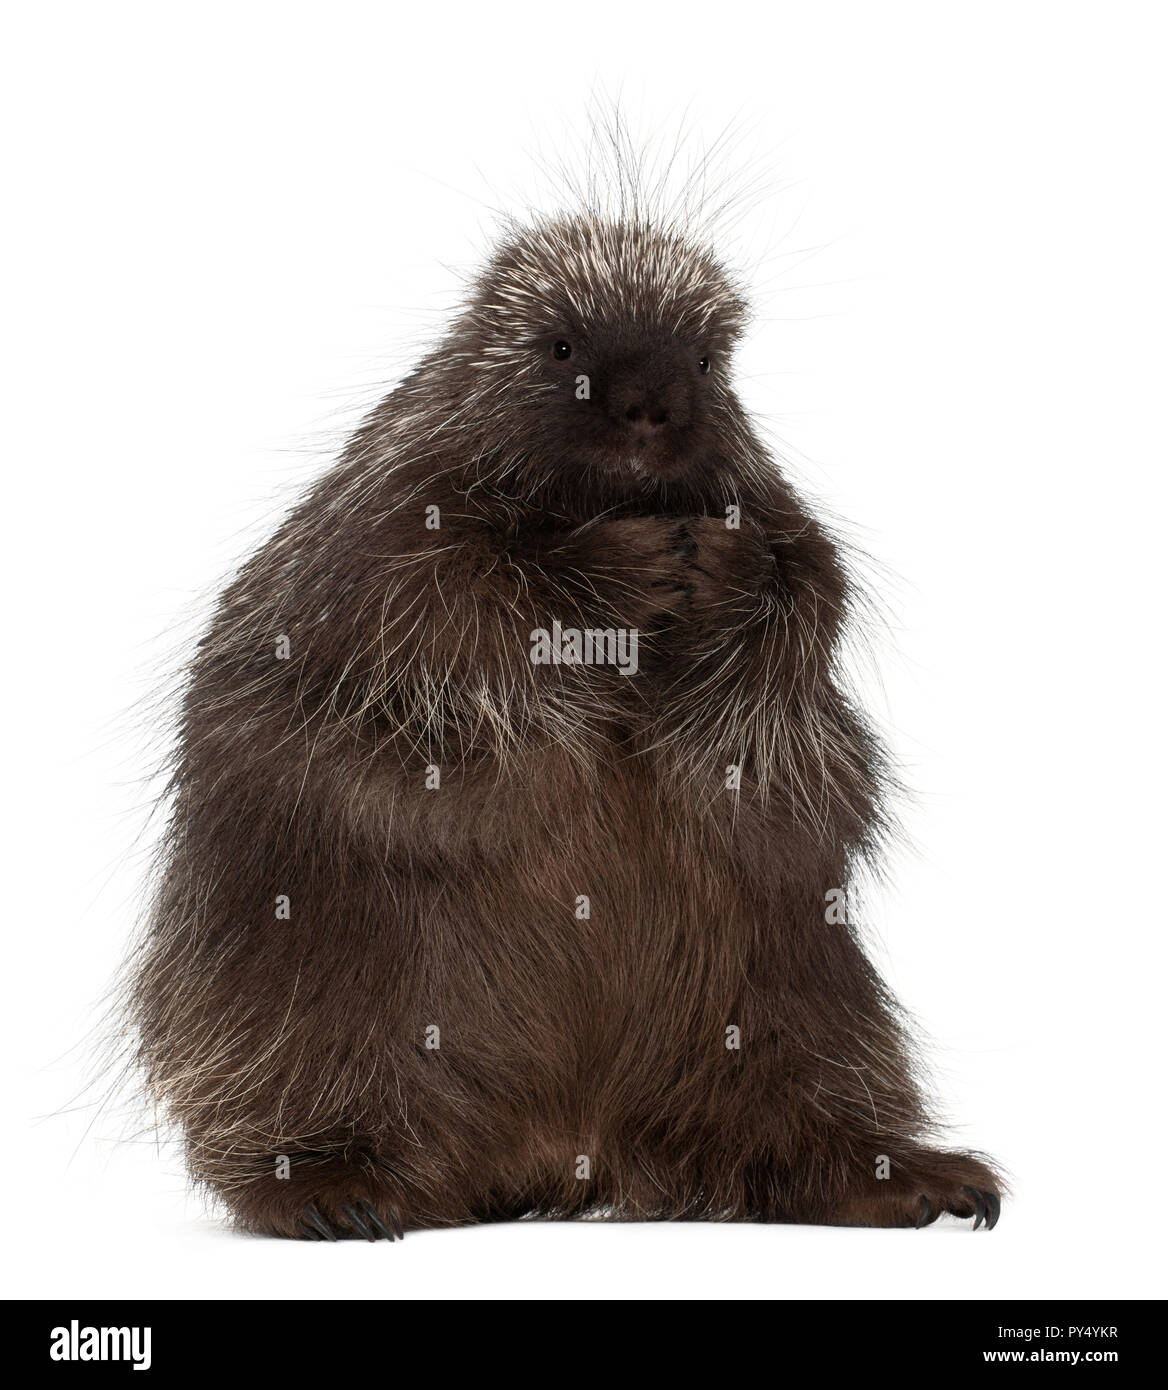 North American Porcupine, Erethizon dorsatum, also known as Canadian Porcupine or Common Porcupine against white background Stock Photo